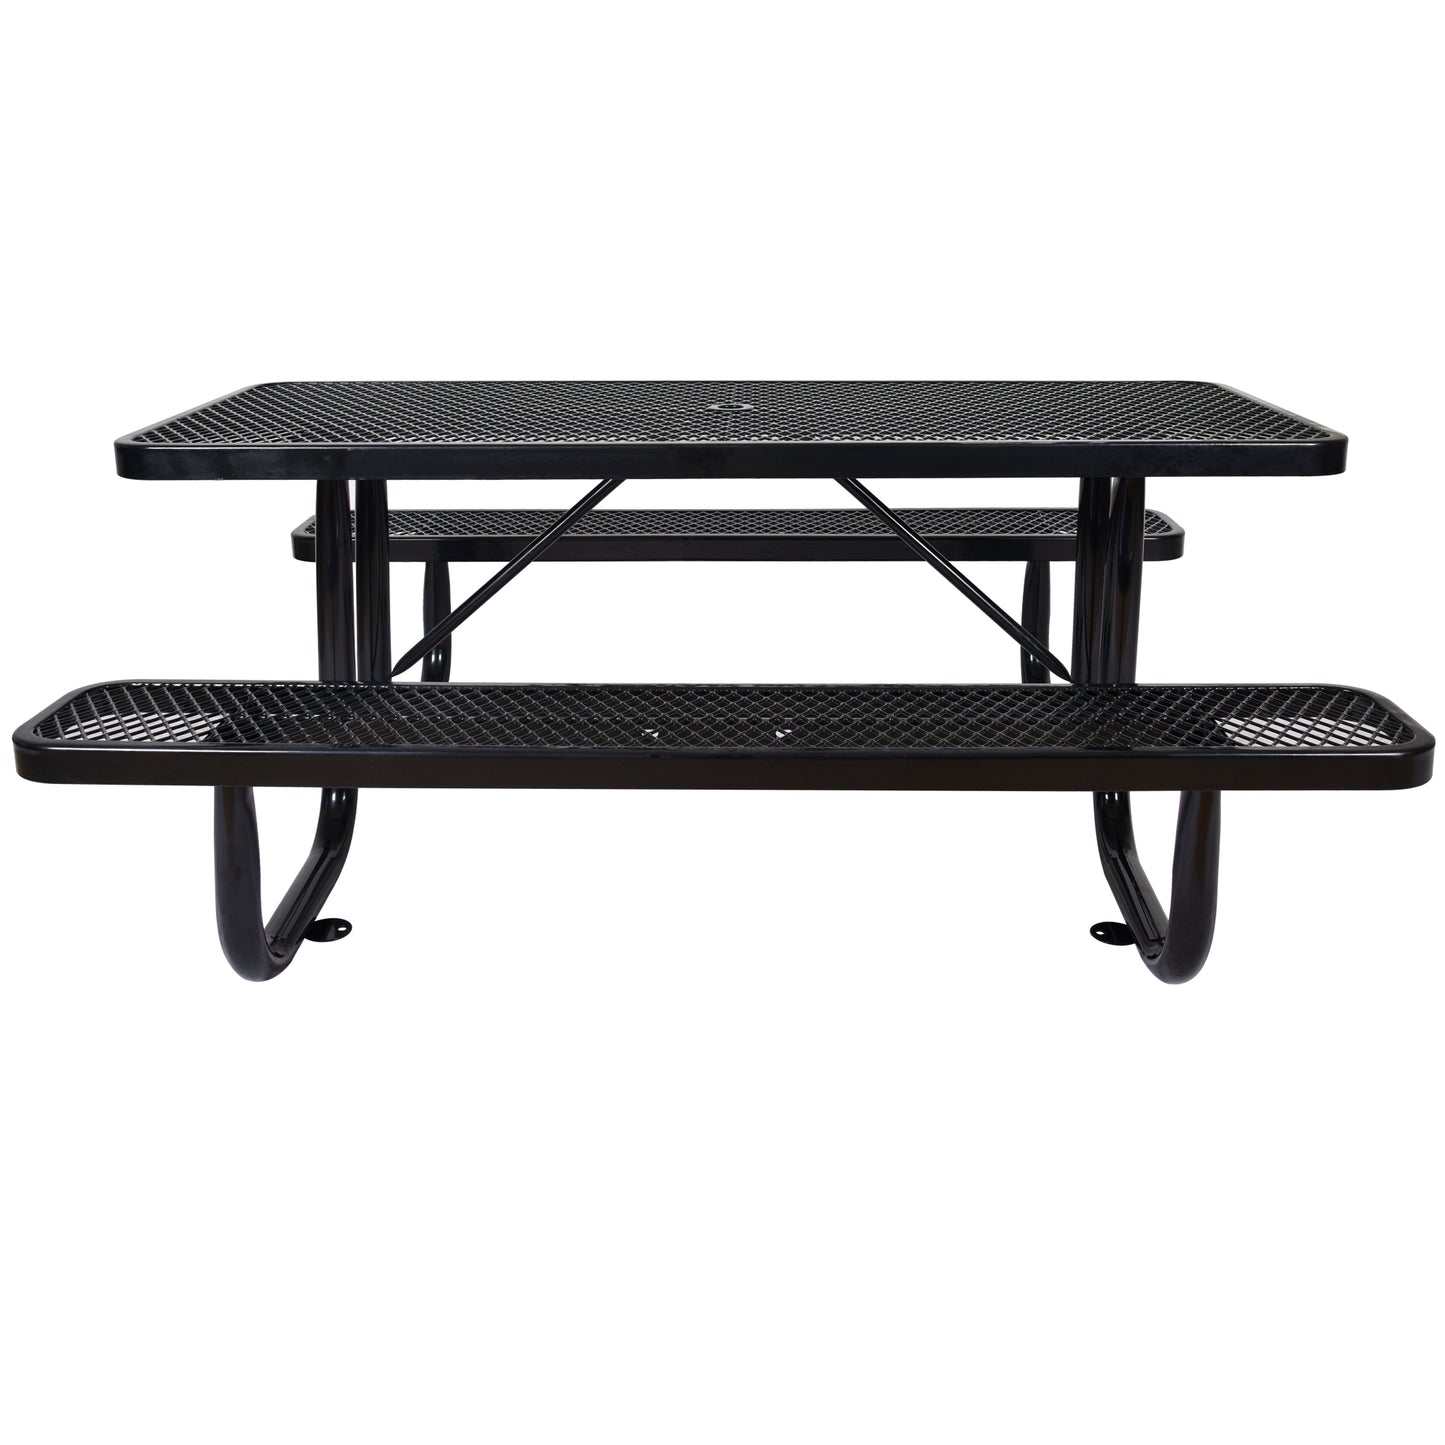 6 ft. Rectangular Outdoor Steel Picnic Table ,BLACK with umbrella pole